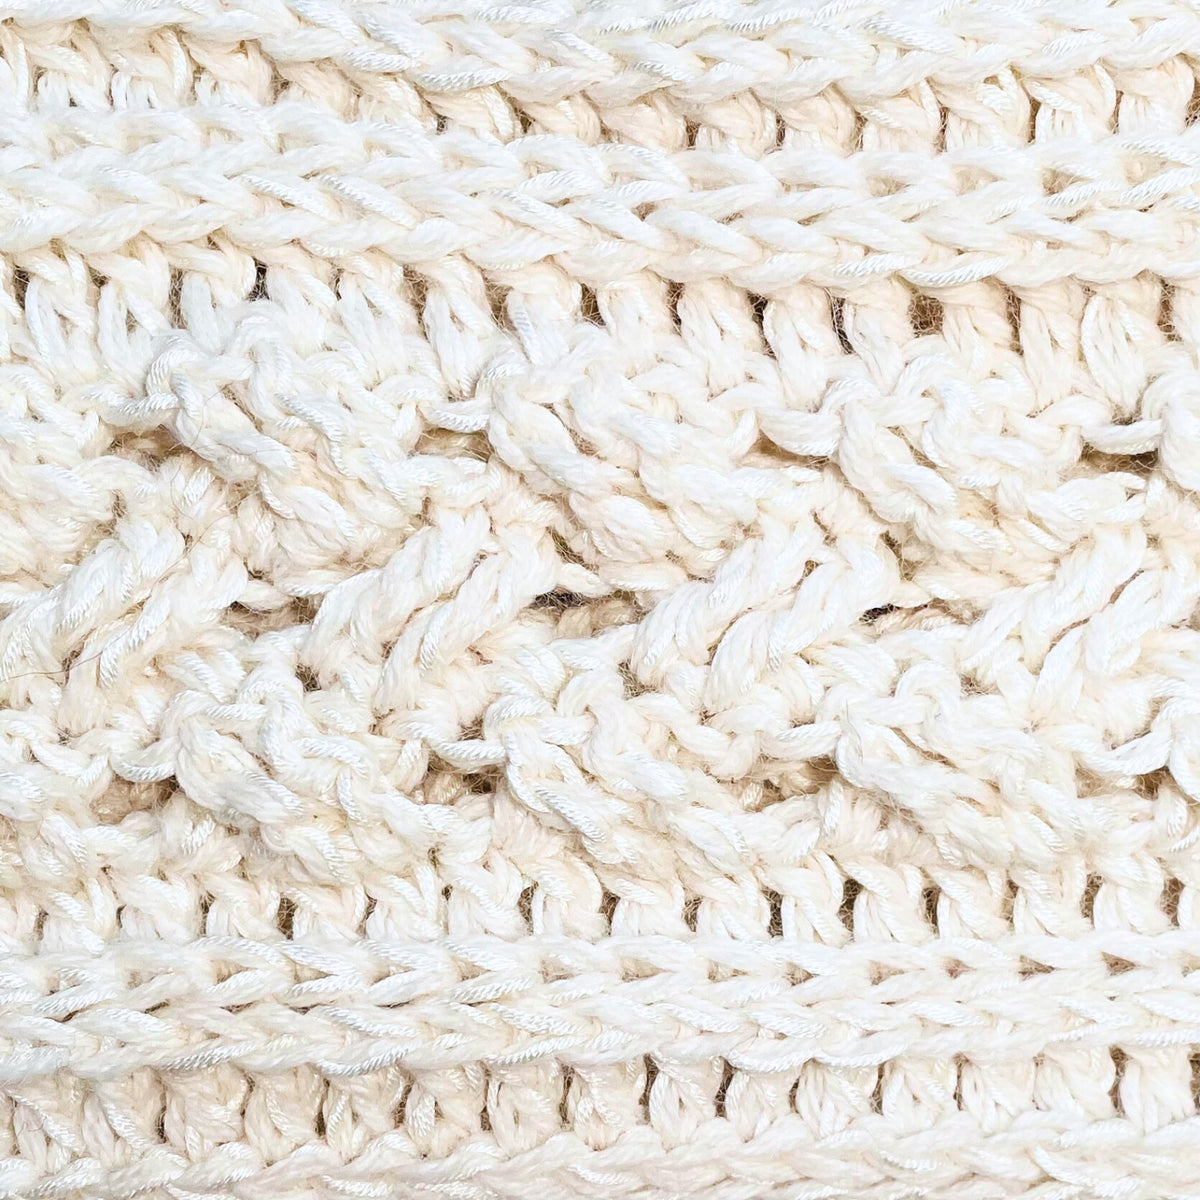 A close up photograph of the warm cozy handmade knit crochet Alpacas of Montana scarf in the color natural white.